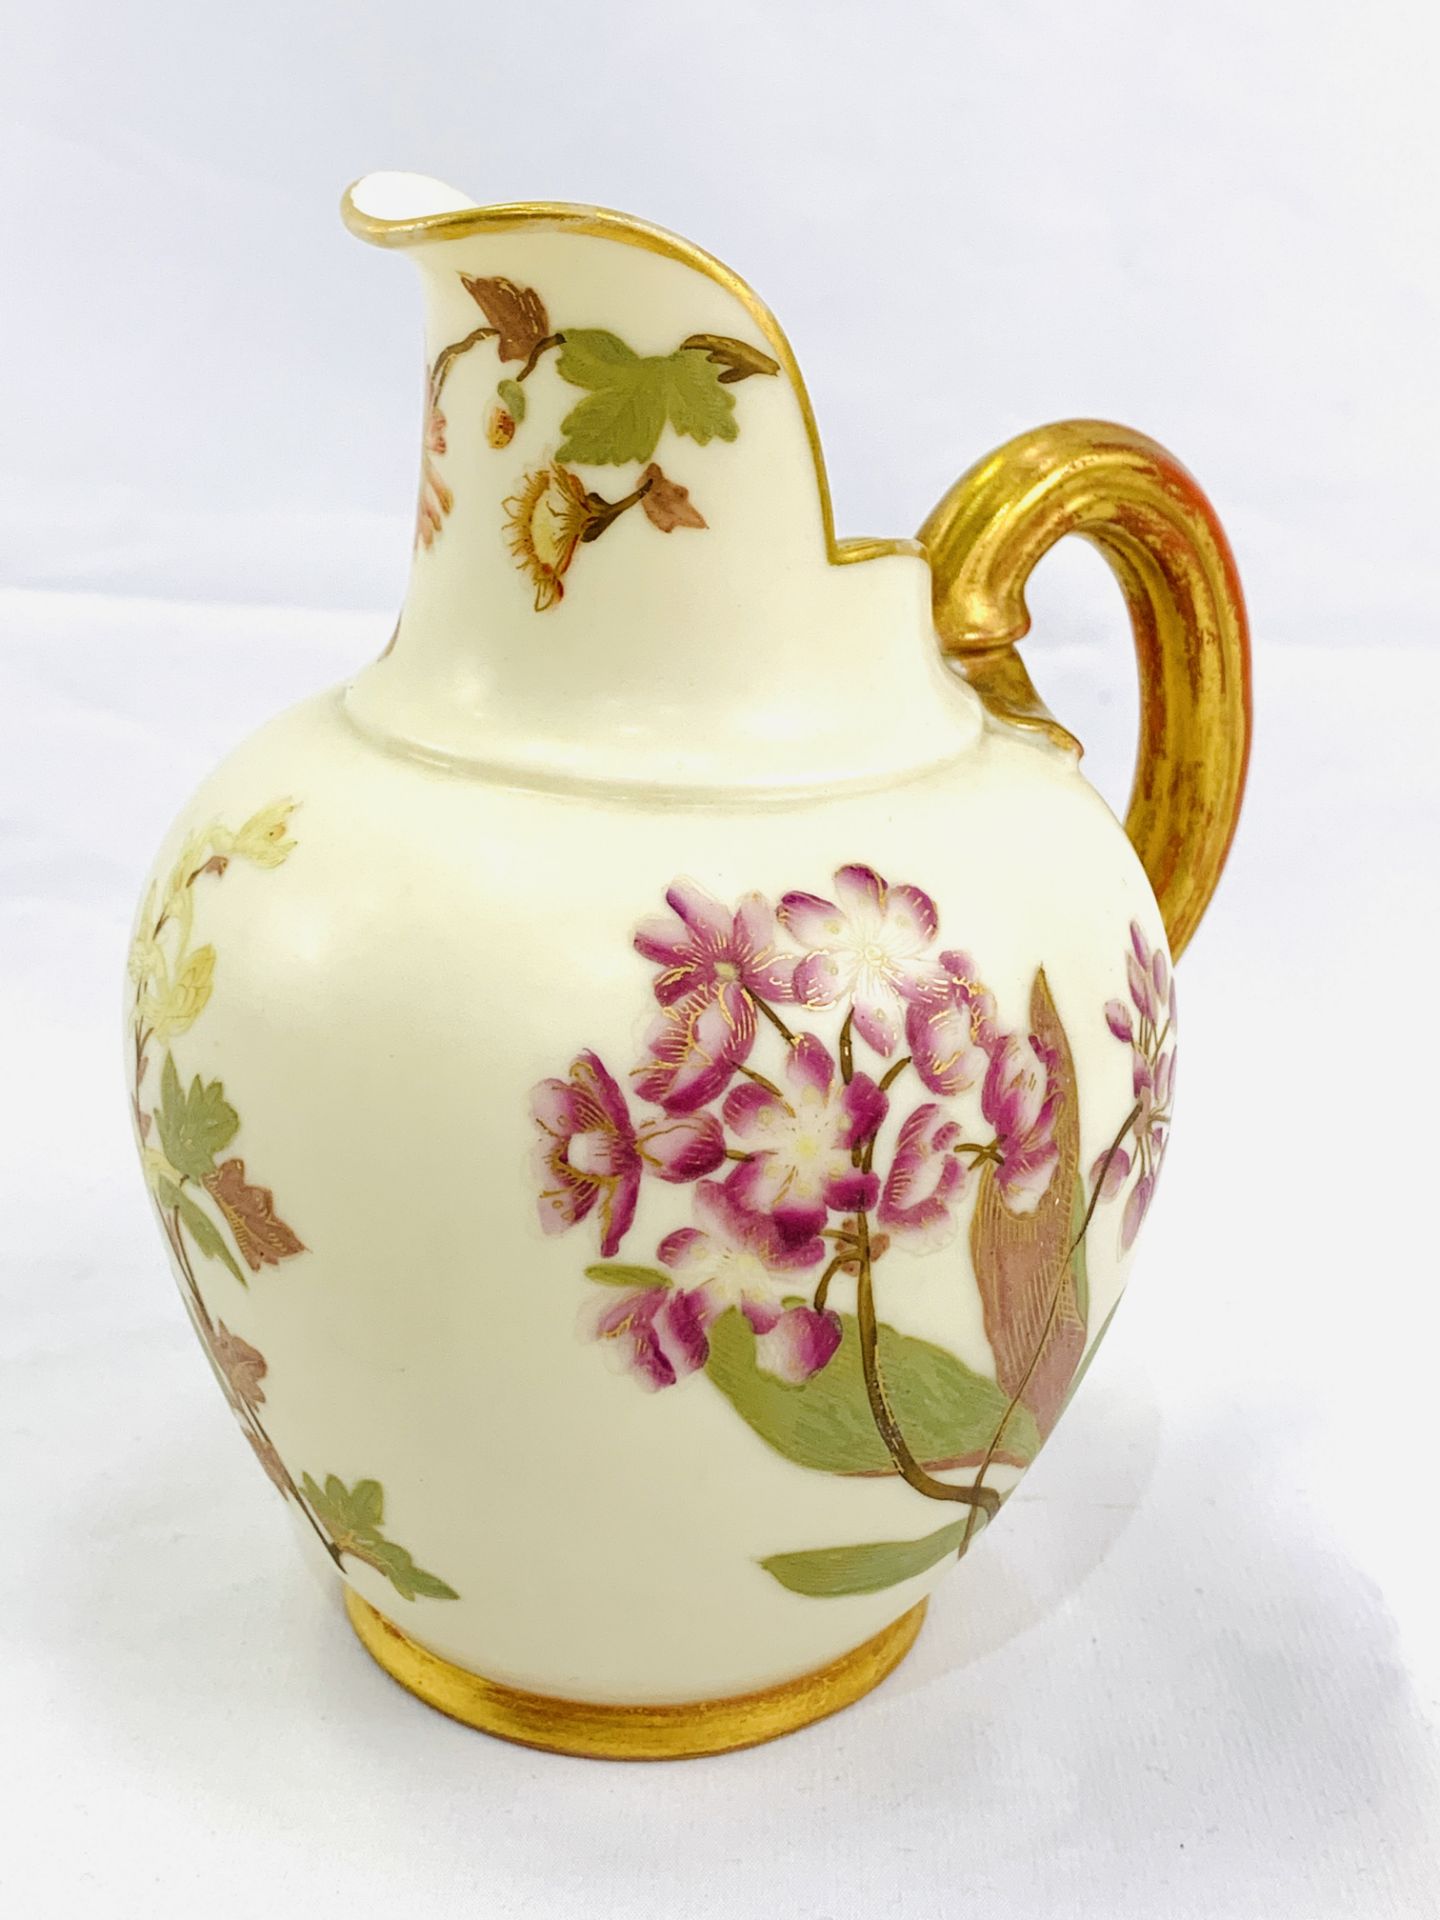 Royal Worcester jug circa 1897 hand painted with flowers - Image 2 of 6